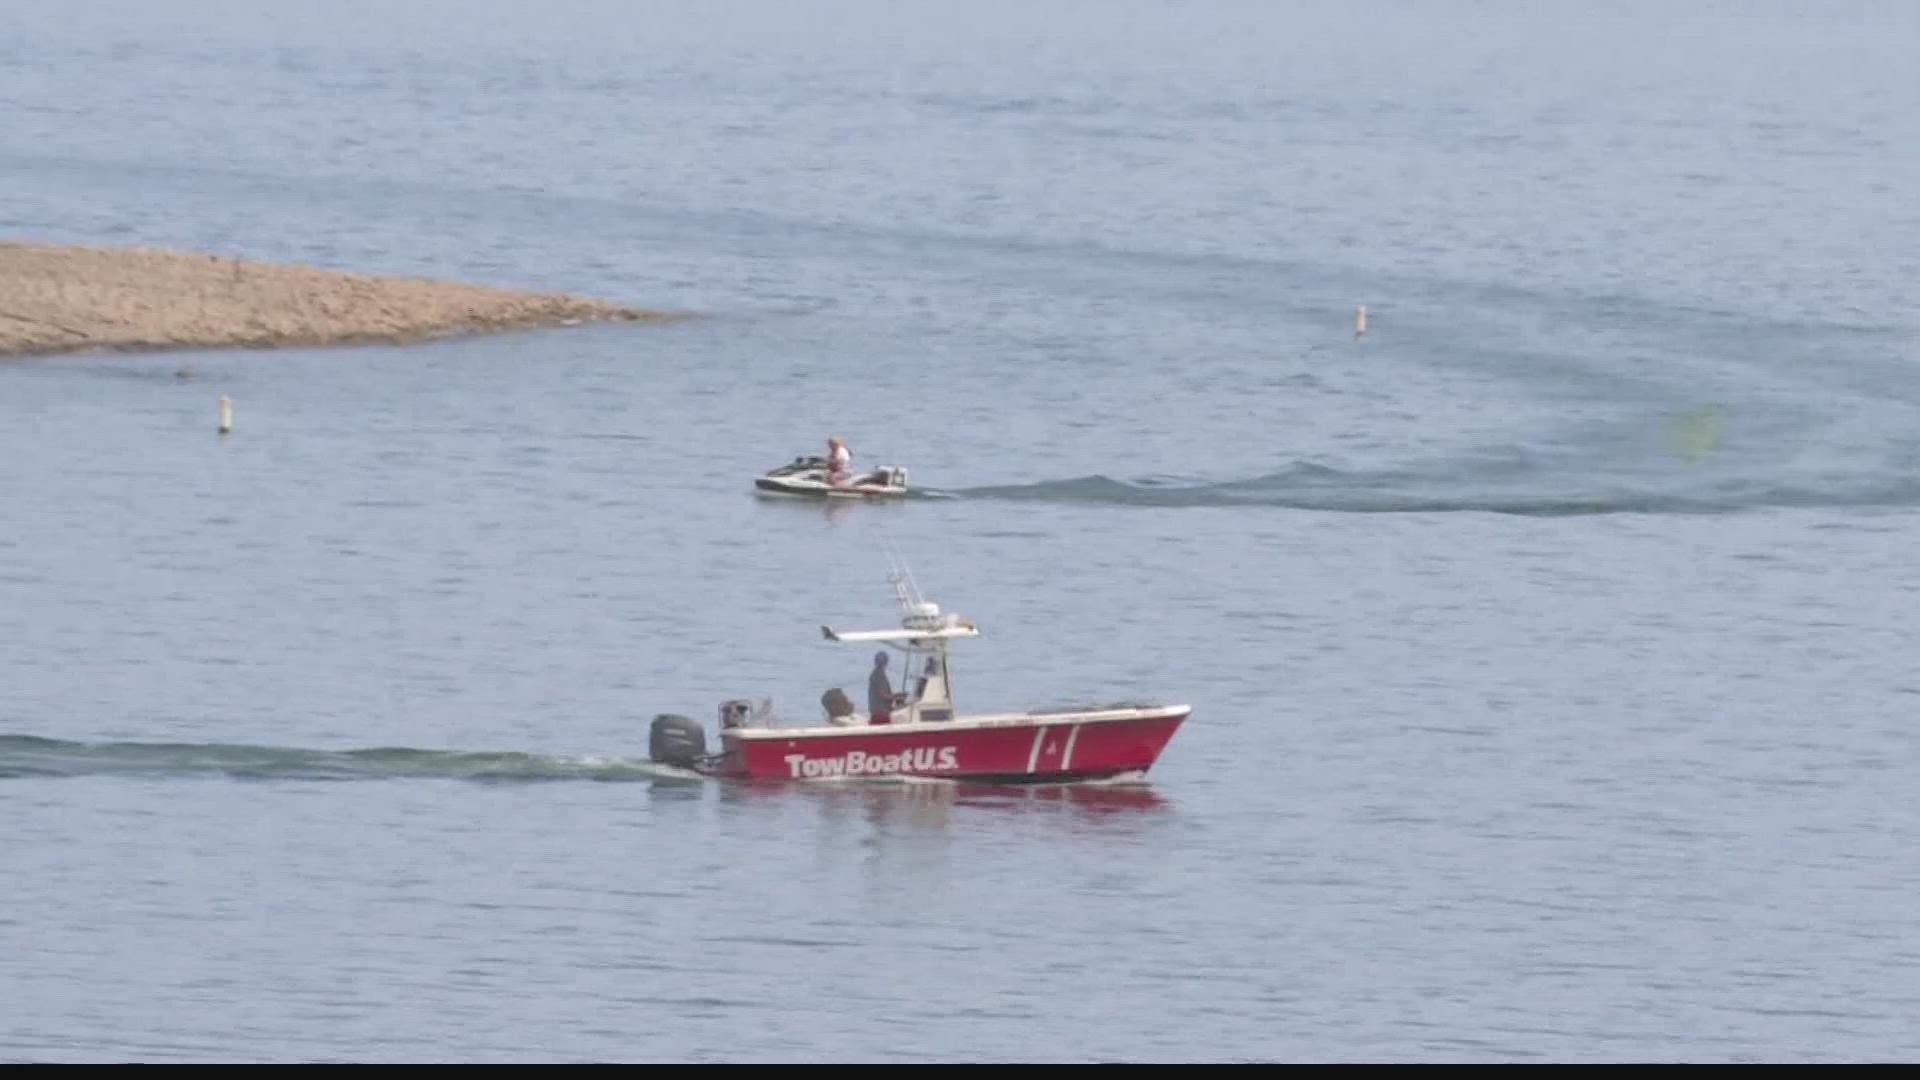 Deputies haven't yet identified the body found at Saguaro Lake and don't know what the events leading up to the drowning were.